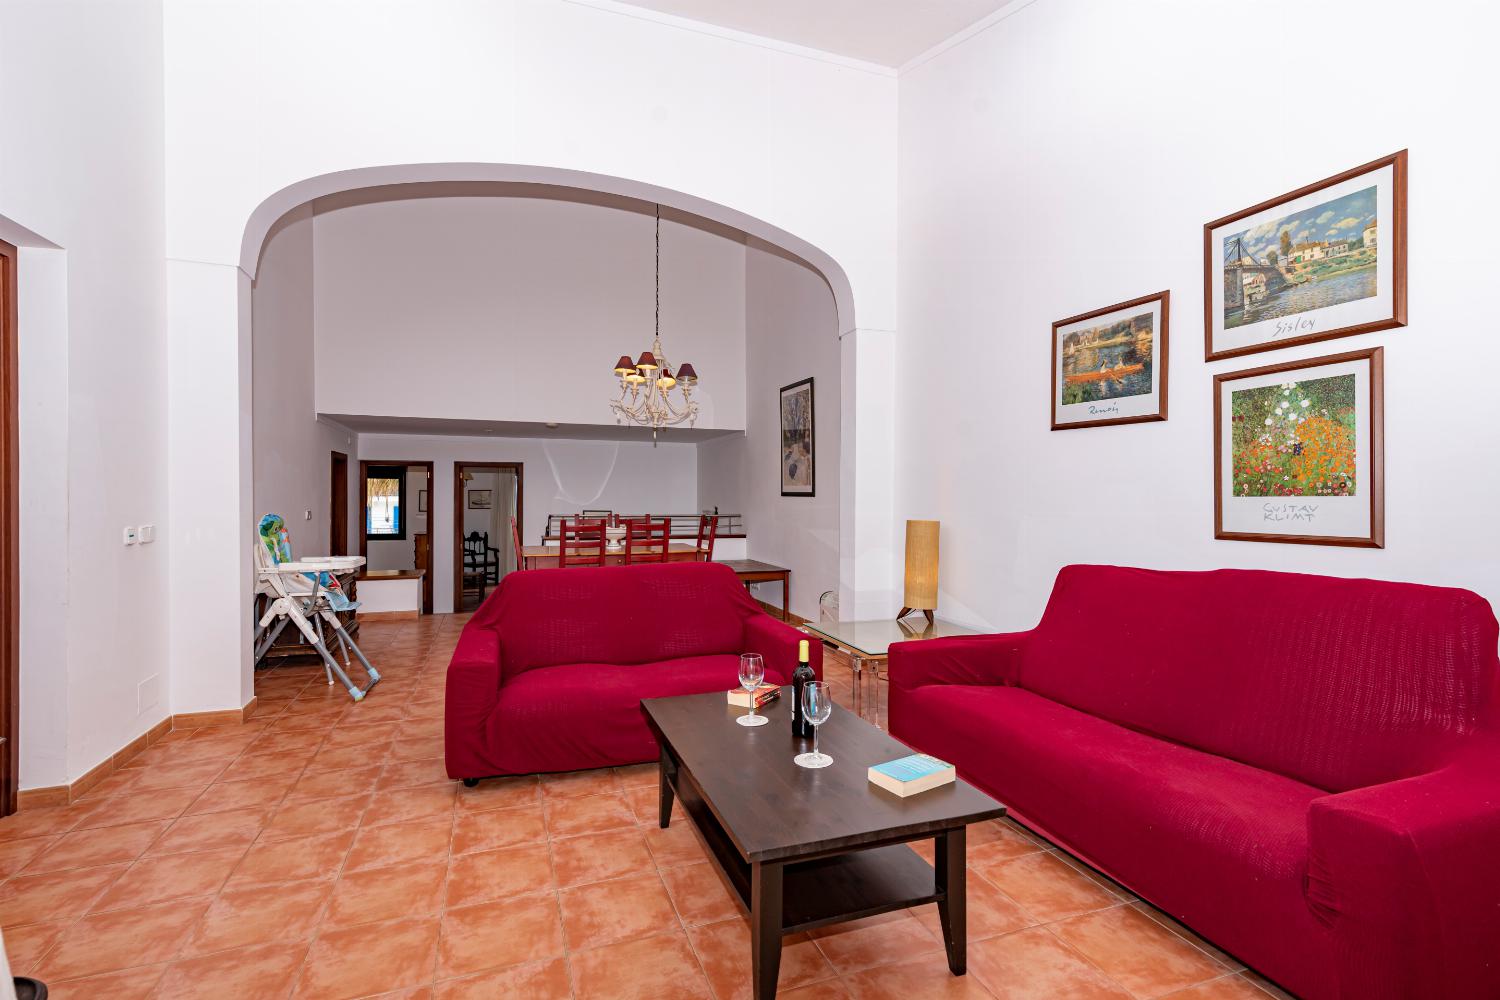 Open-plan living room with sofas, dining area, A/C, WiFi internet, satellite TV, DVD player, and terrace access